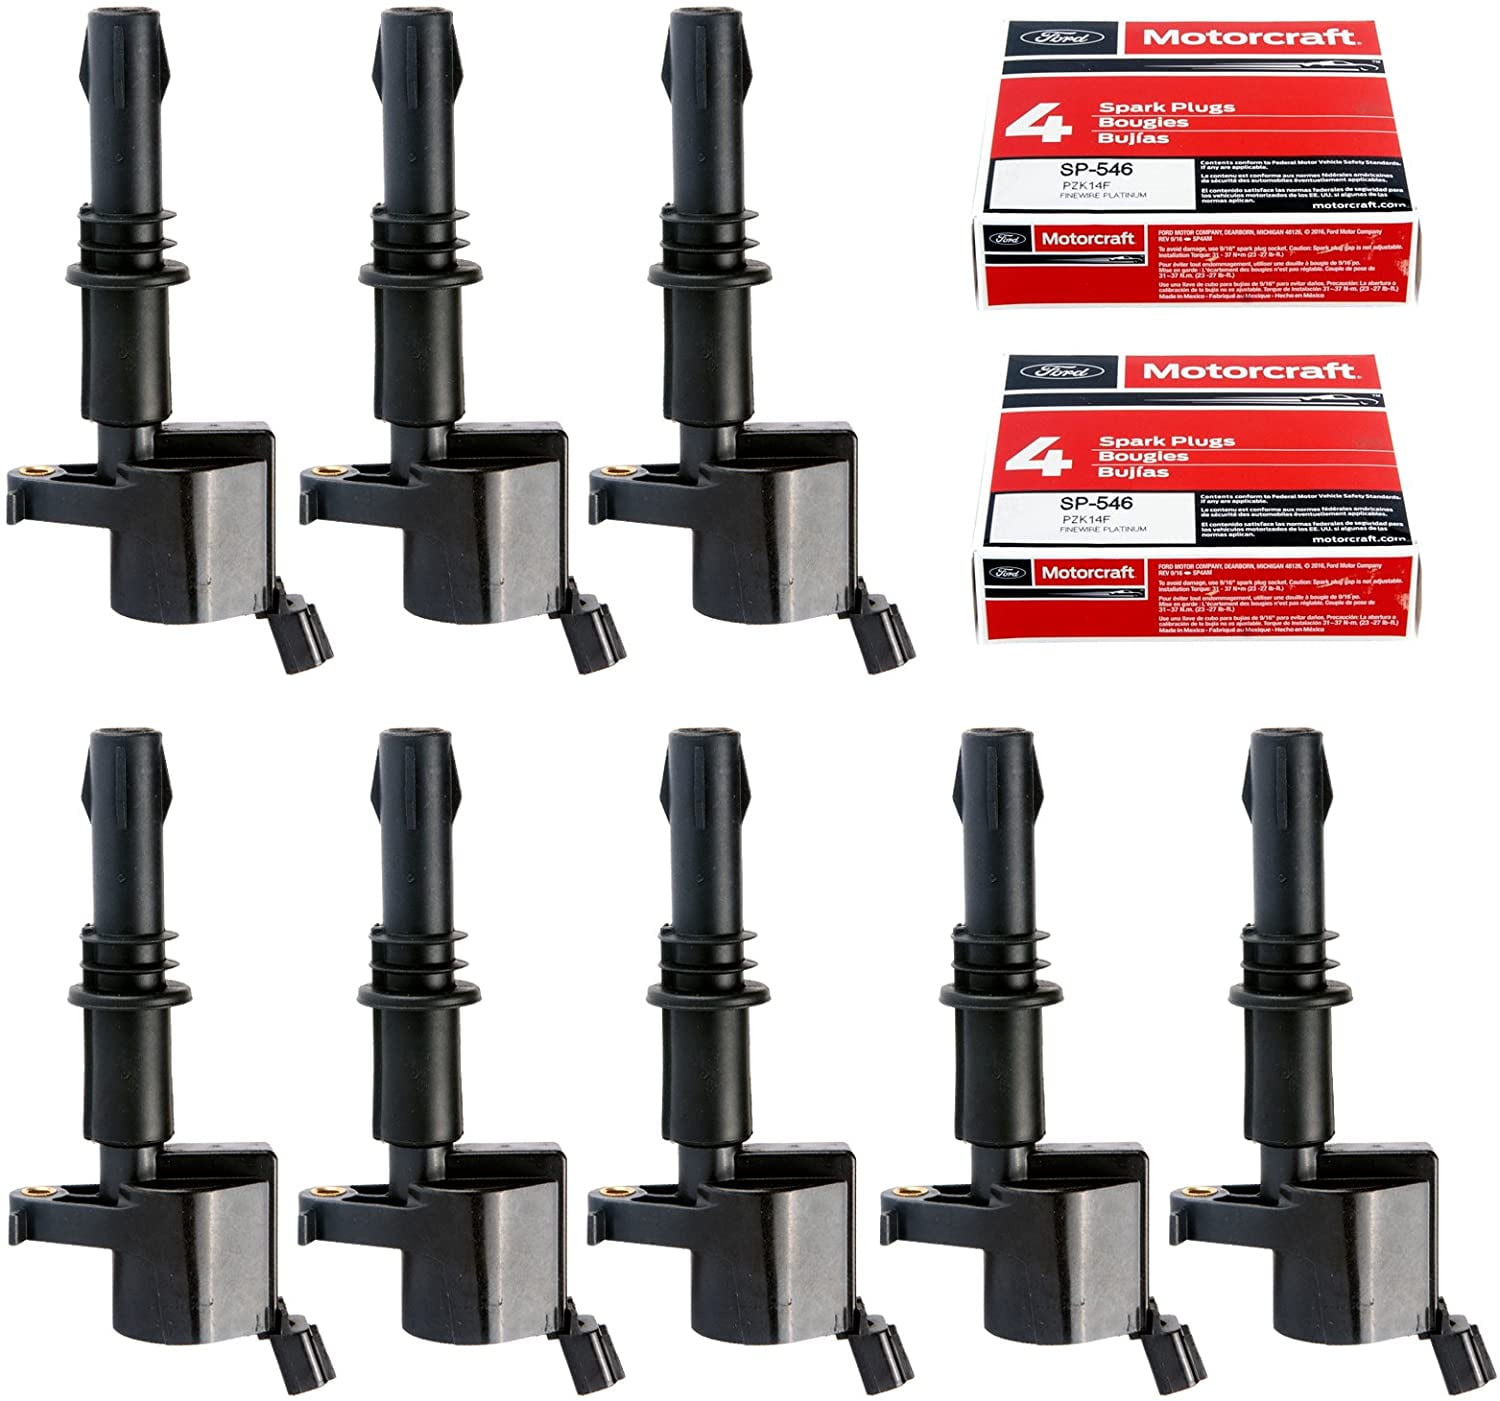 MAS Ignition Coils DG511 with Motorcraft SP515 SP546 Spark Plugs for Ford  Lincoln Mercury V8 V10 4.6l 5.4l 6.8l Compatible with 3L3E12A366CA 5C1584  C1541 FD-508 UF-537 DQ50101D (set of 8)